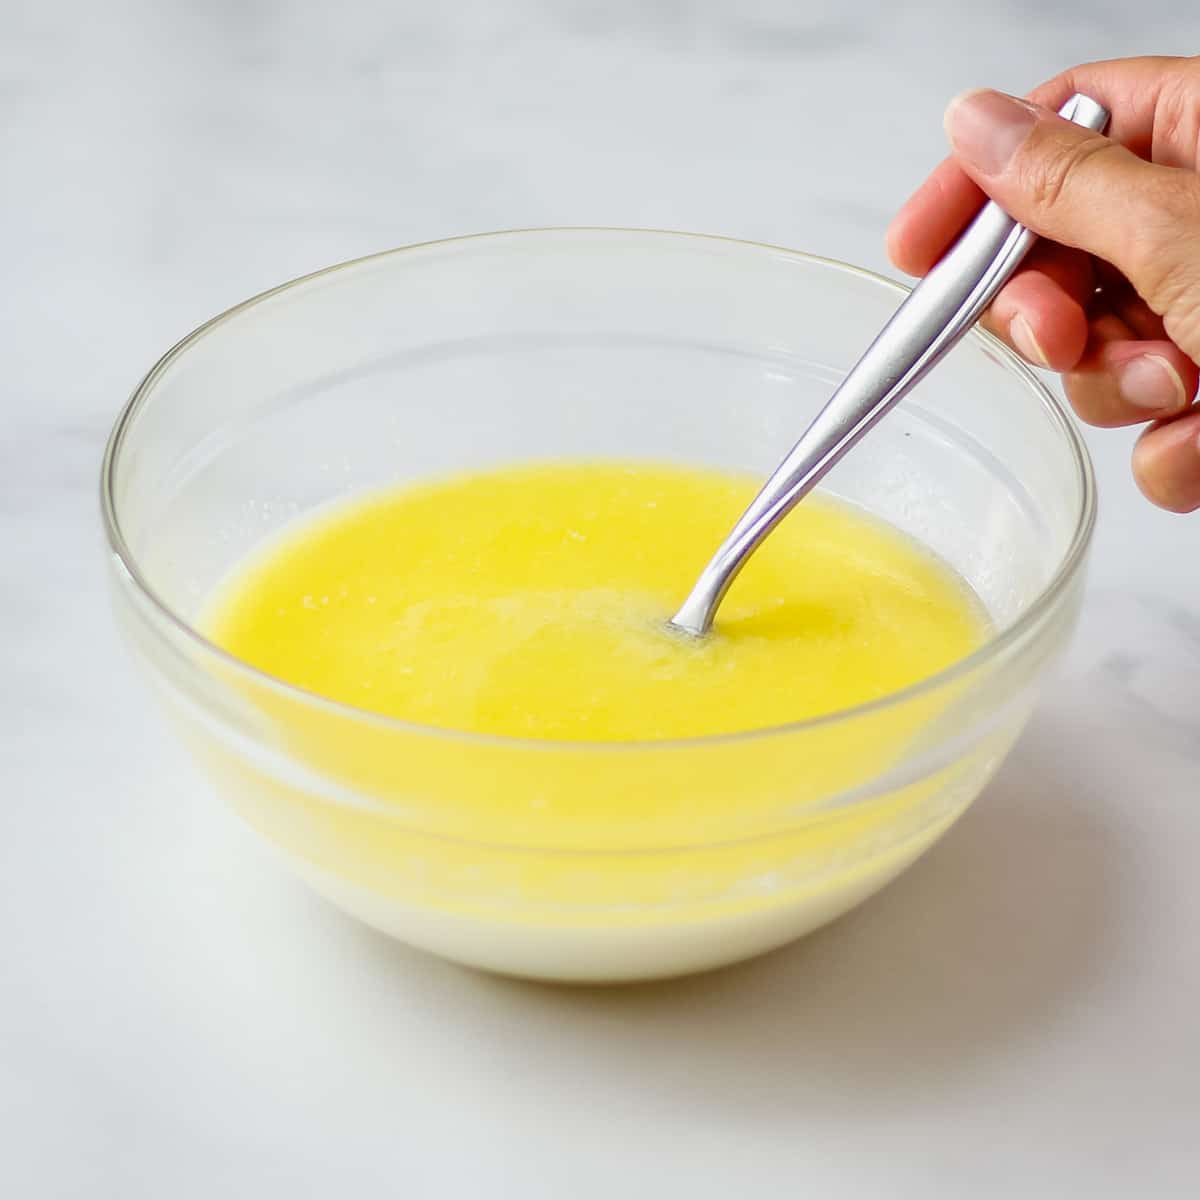 Stirring milk, sugar, and melted butter together in a glass bowl.